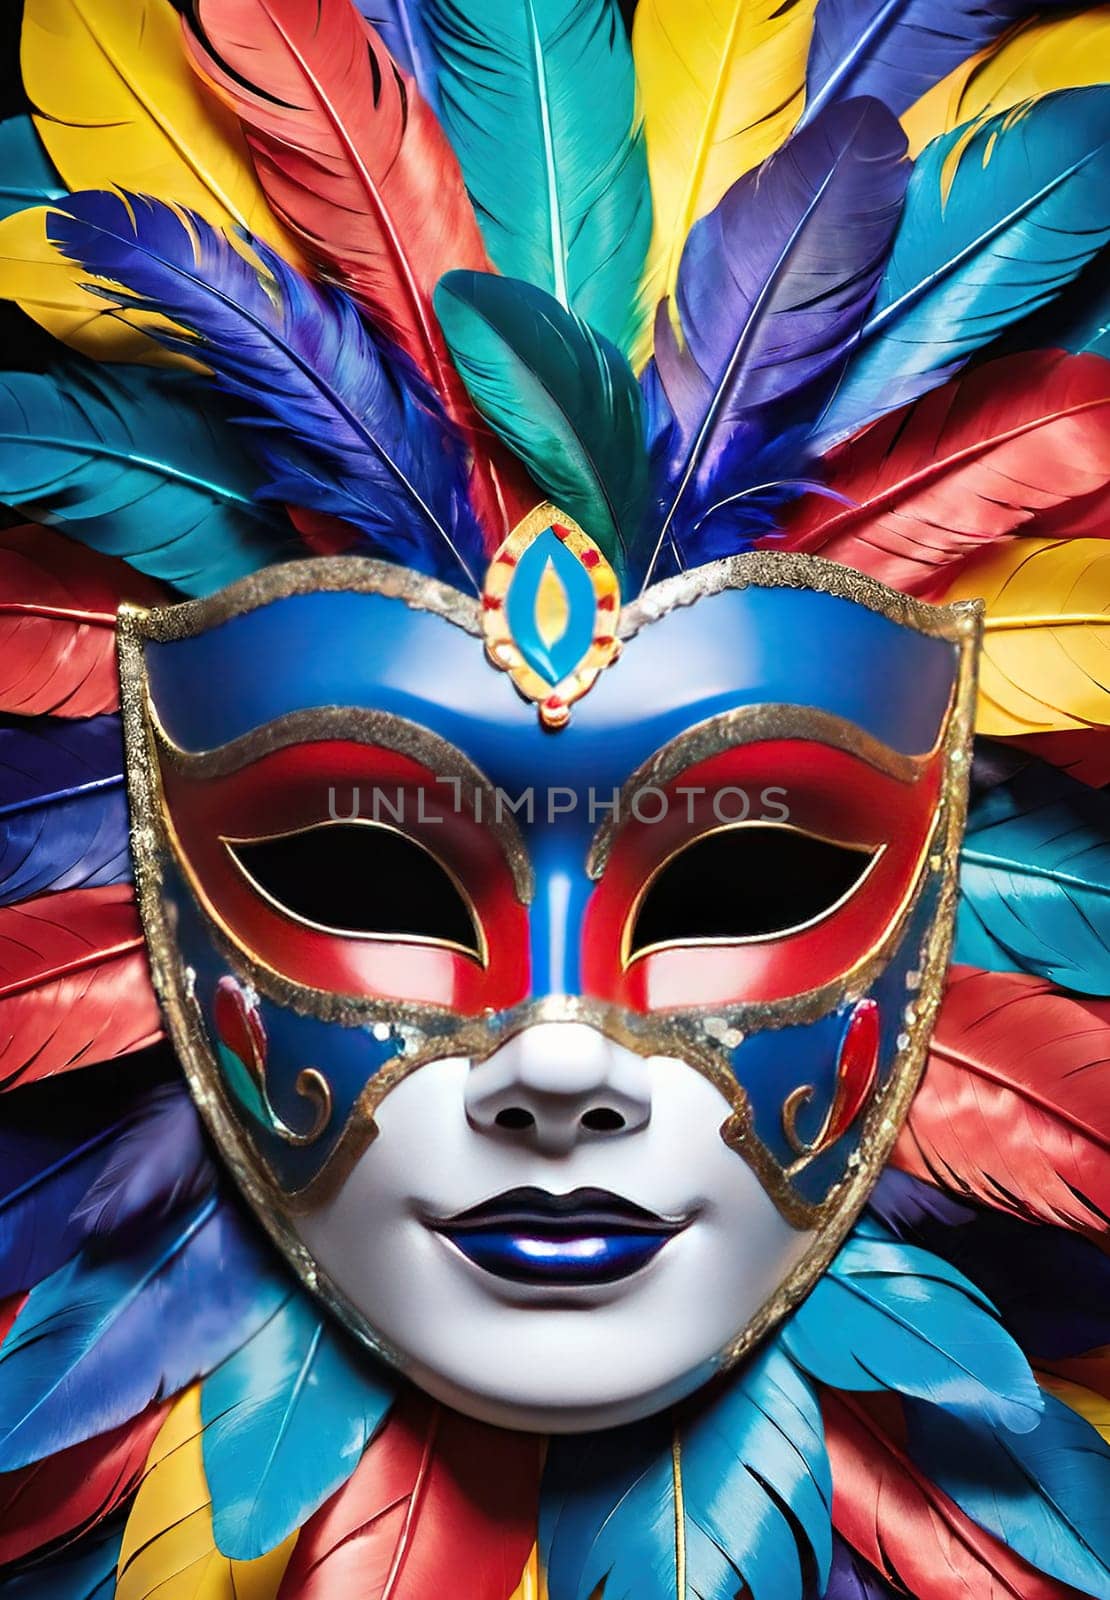 Colorful carnival mask with feathers on background. by yilmazsavaskandag